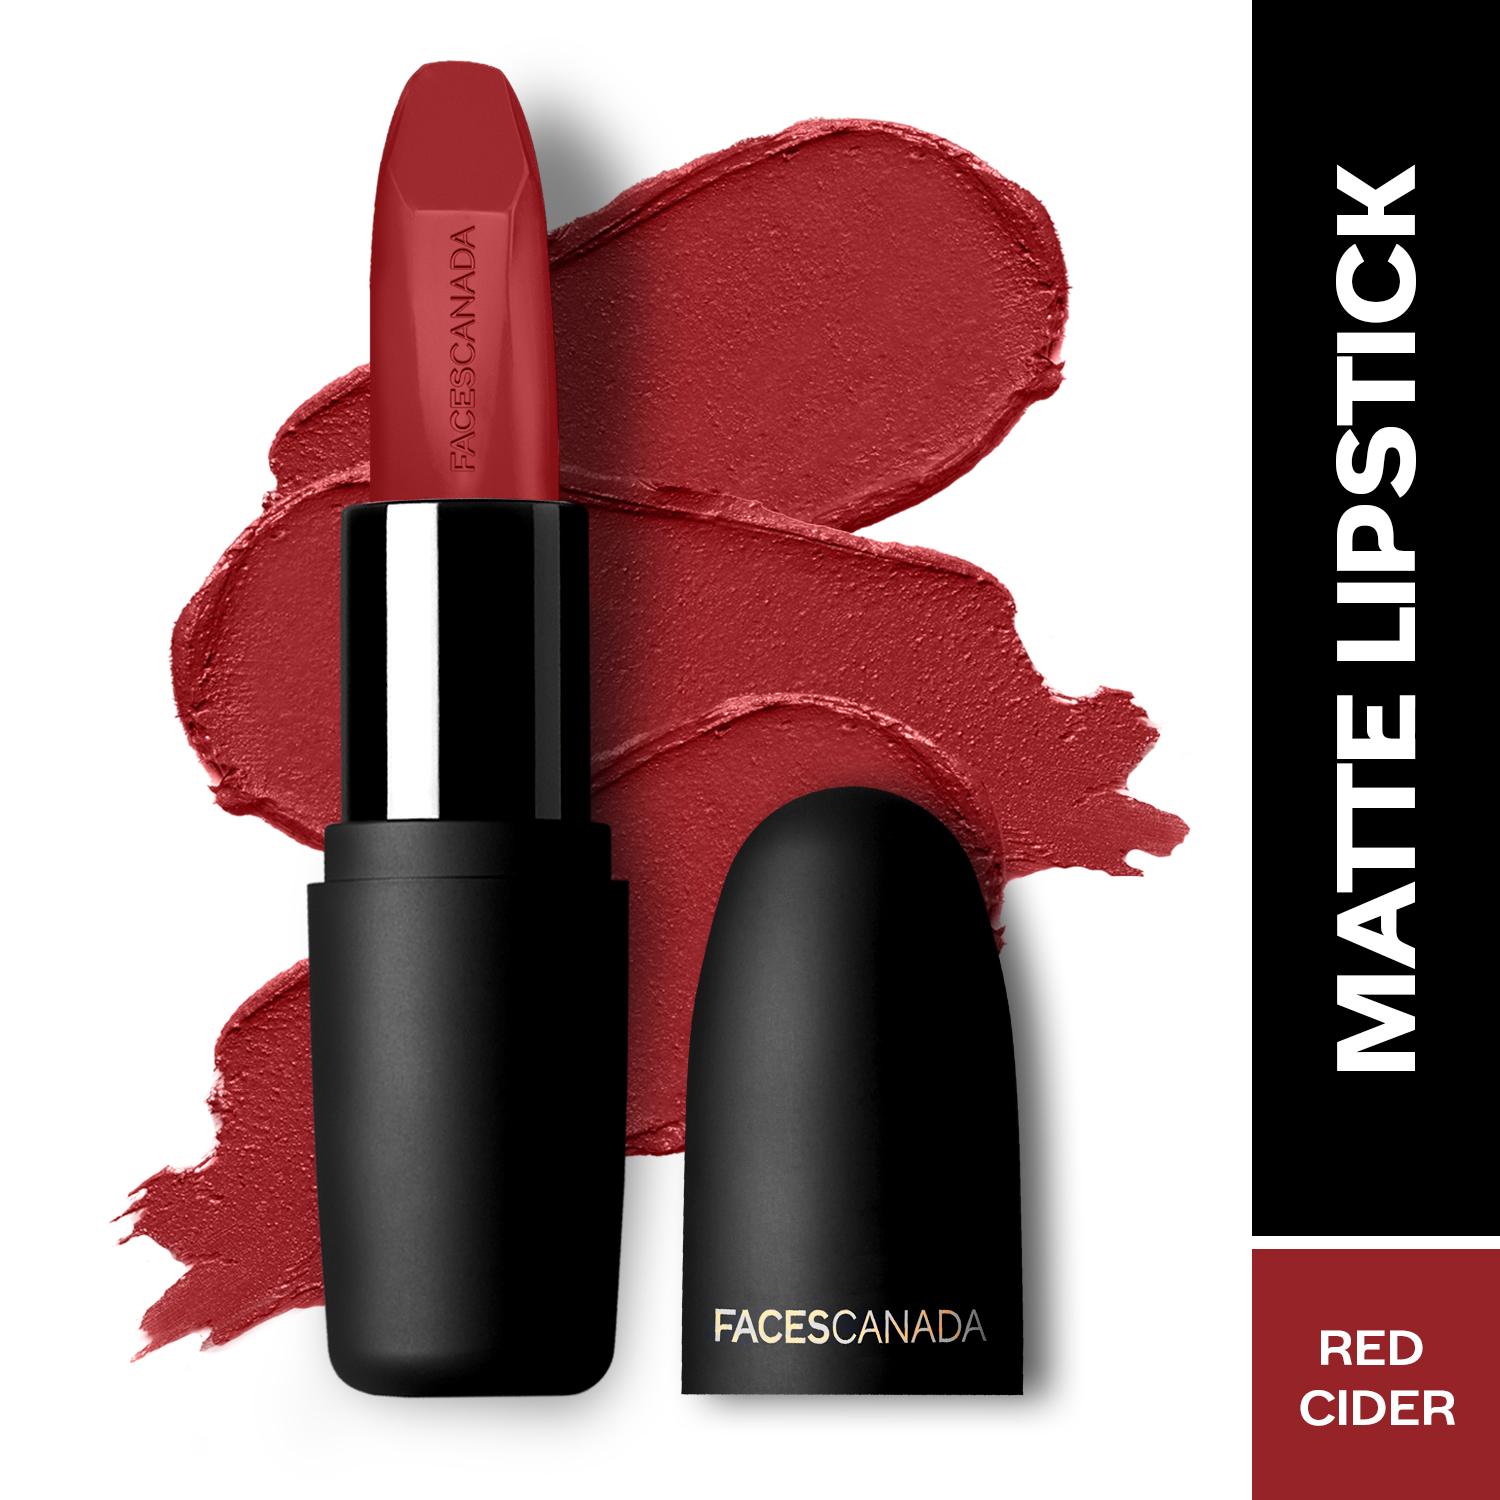 Faces Canada | Faces Canada Weightless Matte Lipstick, Pigmented and Hydrated Lips - Red Cider 28 (4.5 g)